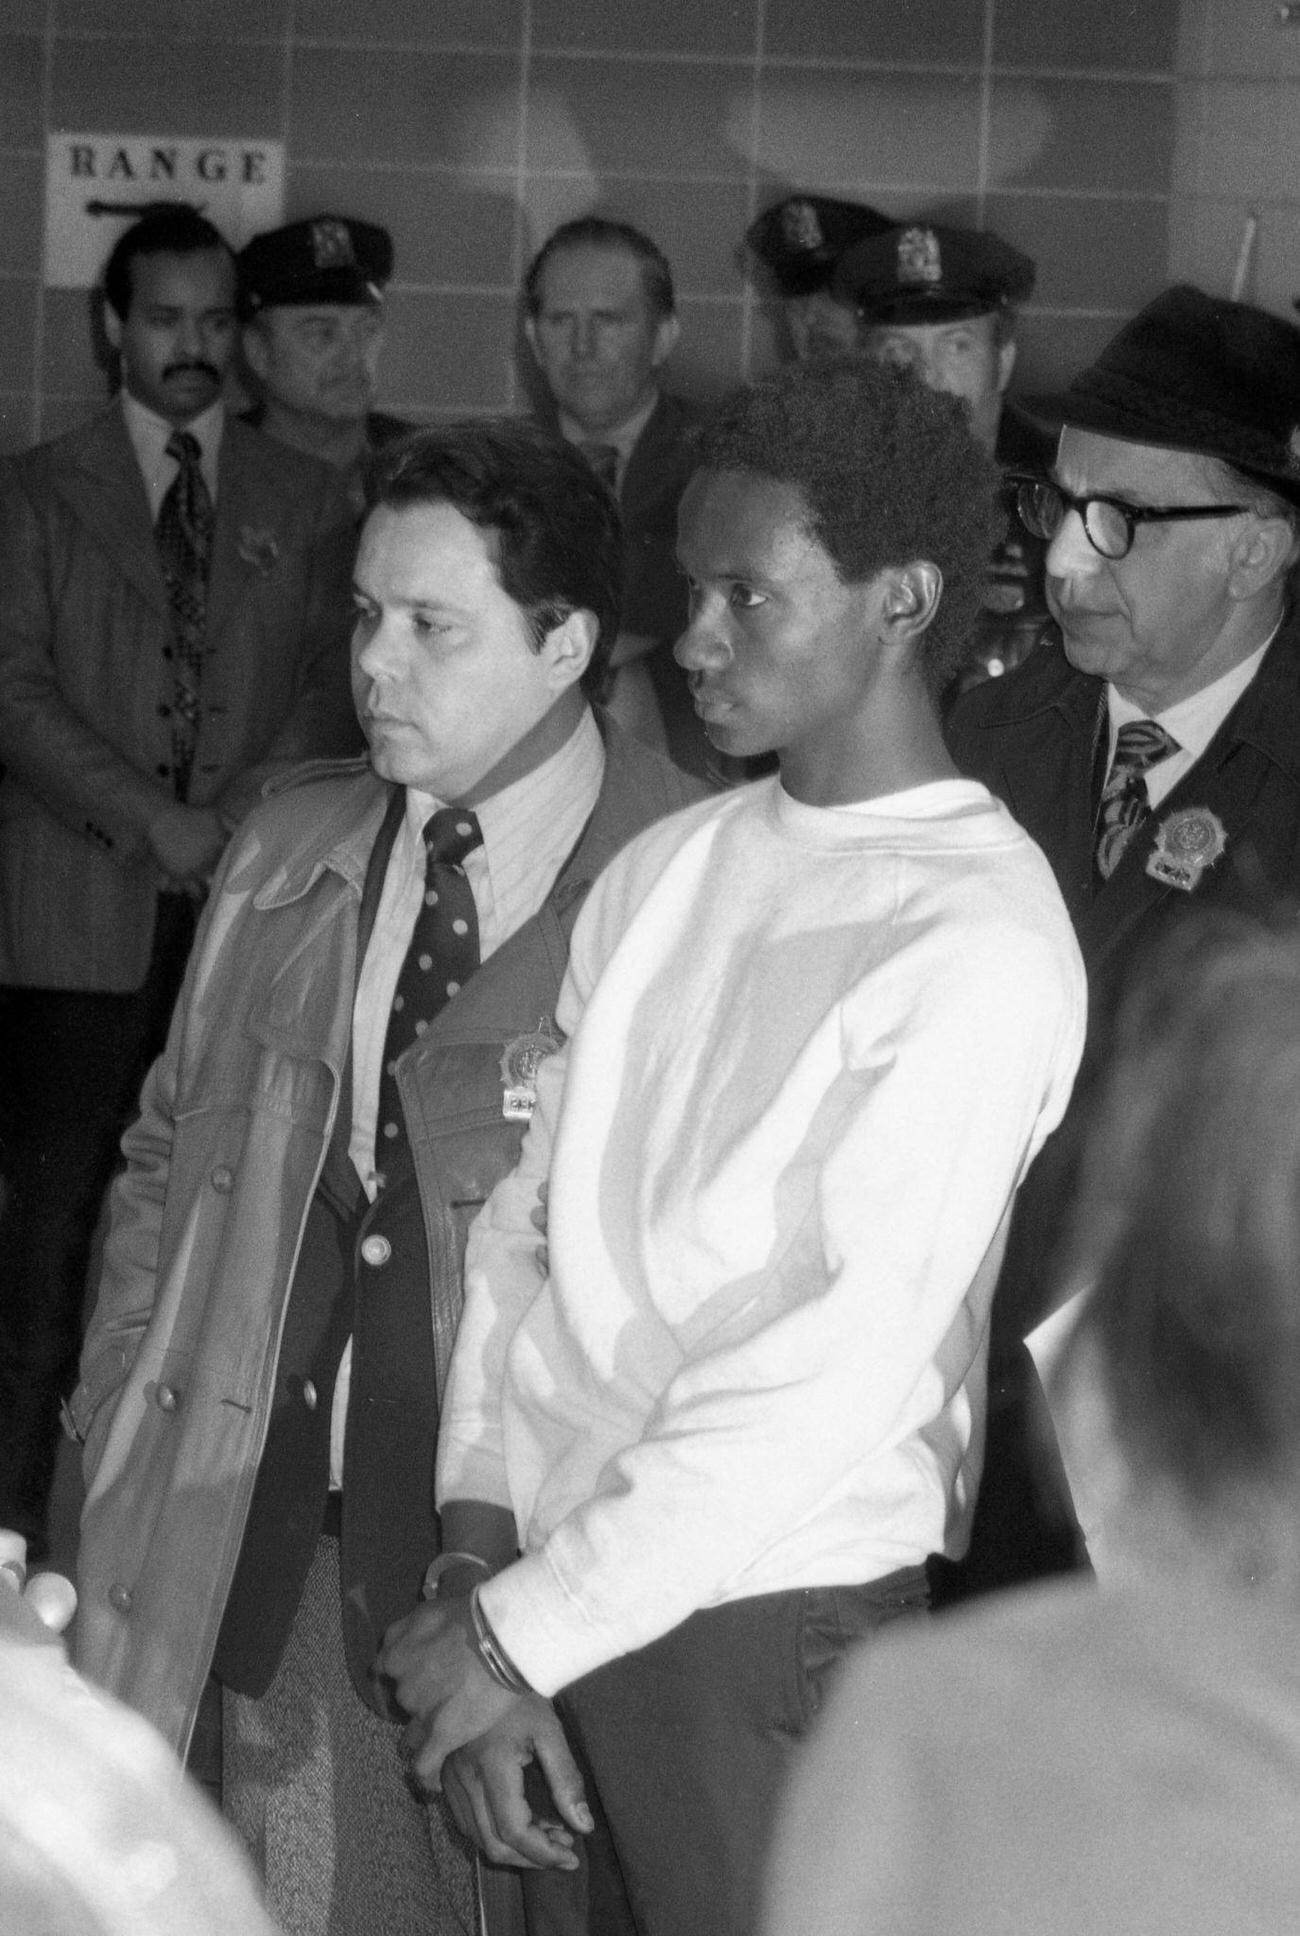 David Abdullah Ar-Rahm Booked For Murder And Robbery In Brooklyn Hostage Siege, 1973